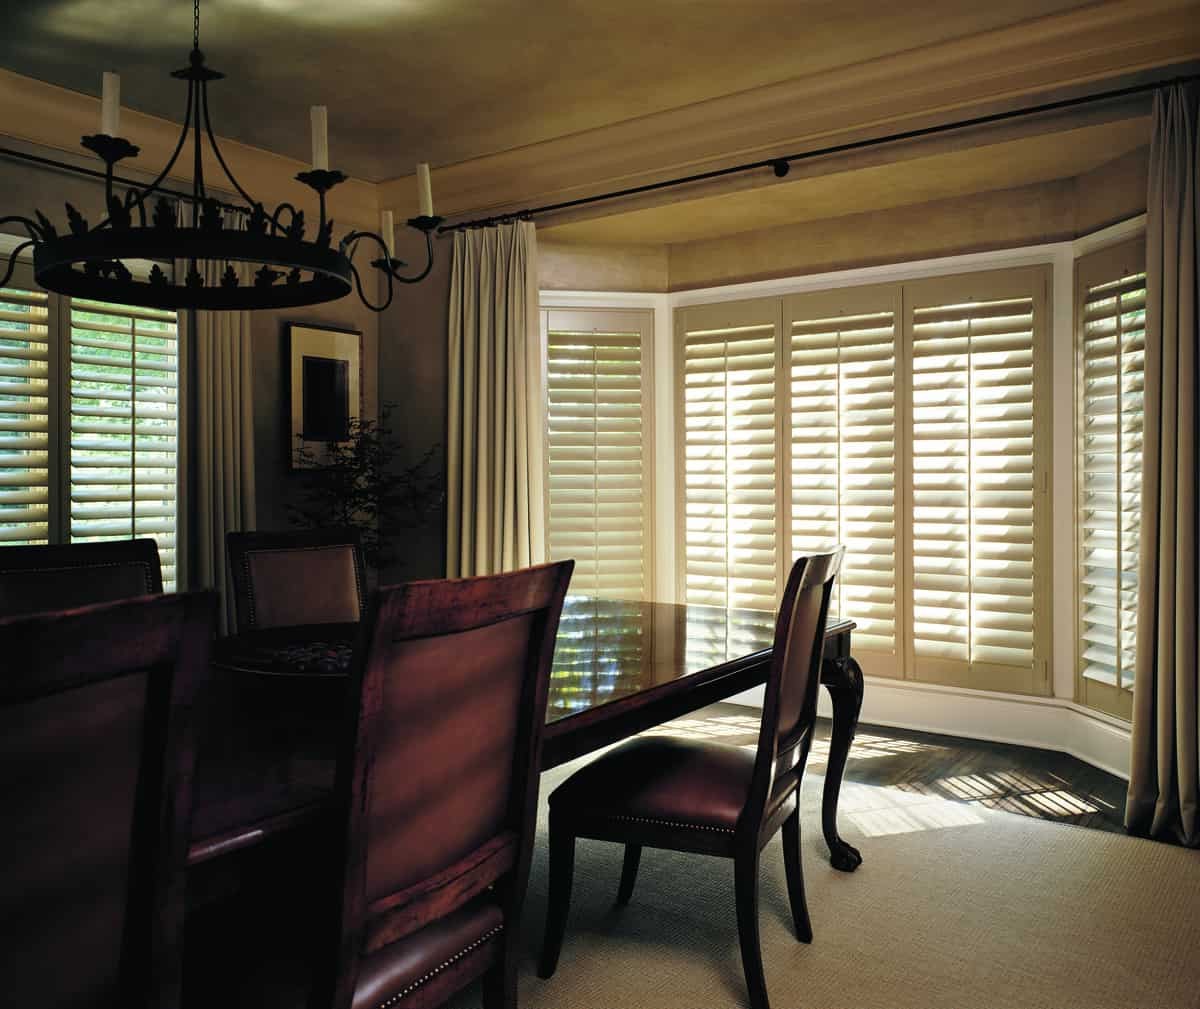 Heritance® Hardwood Shutters near Beachwood, Ohio (OH), that make your home cozy for the holidays.